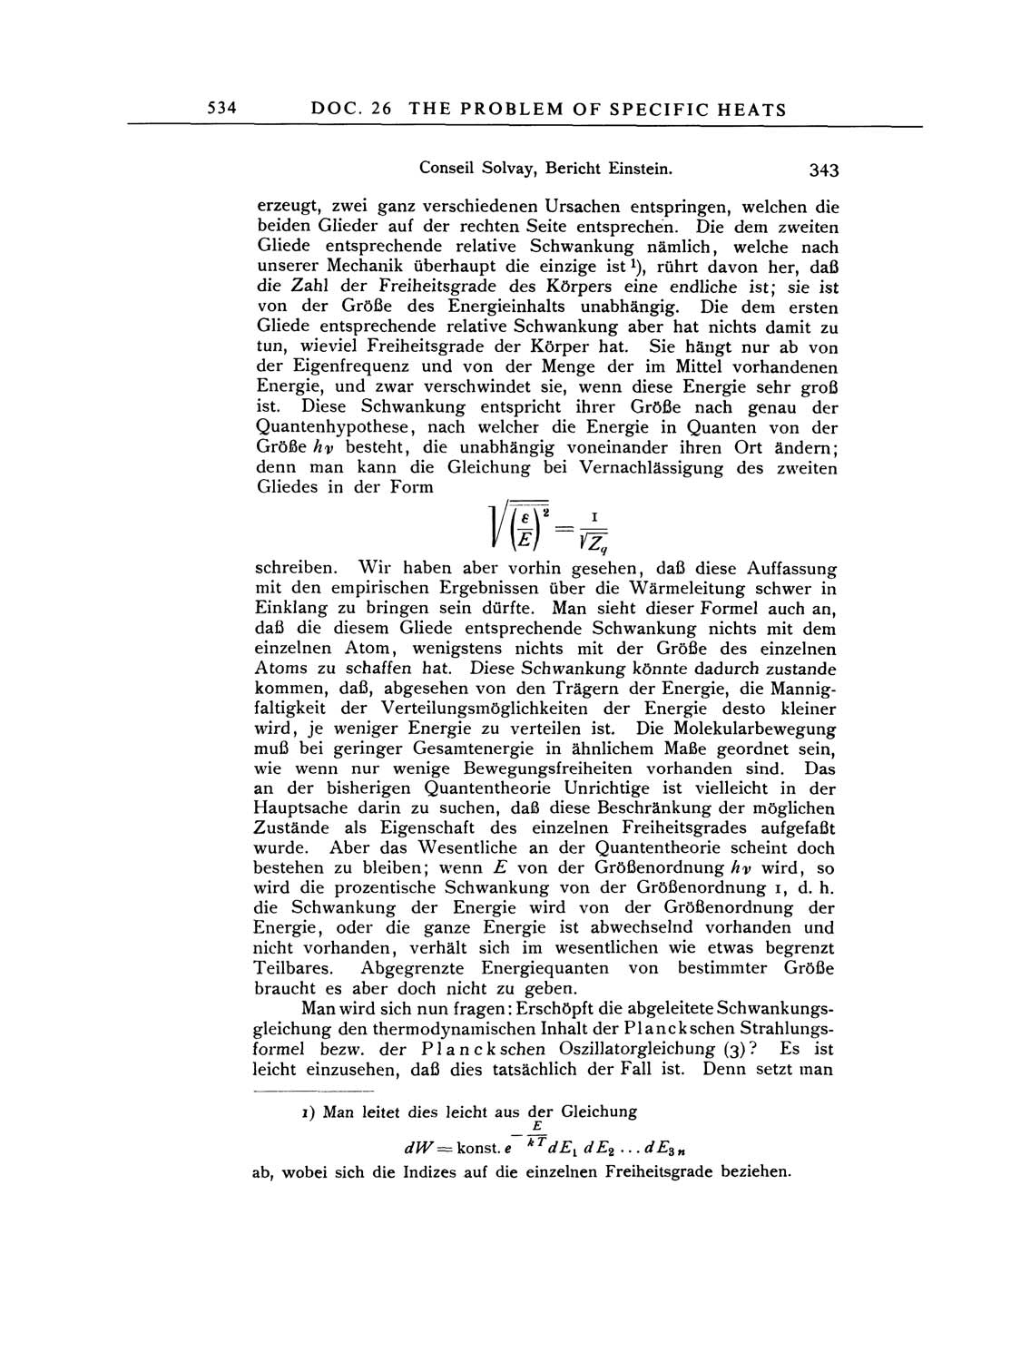 Volume 3: The Swiss Years: Writings 1909-1911 page 534